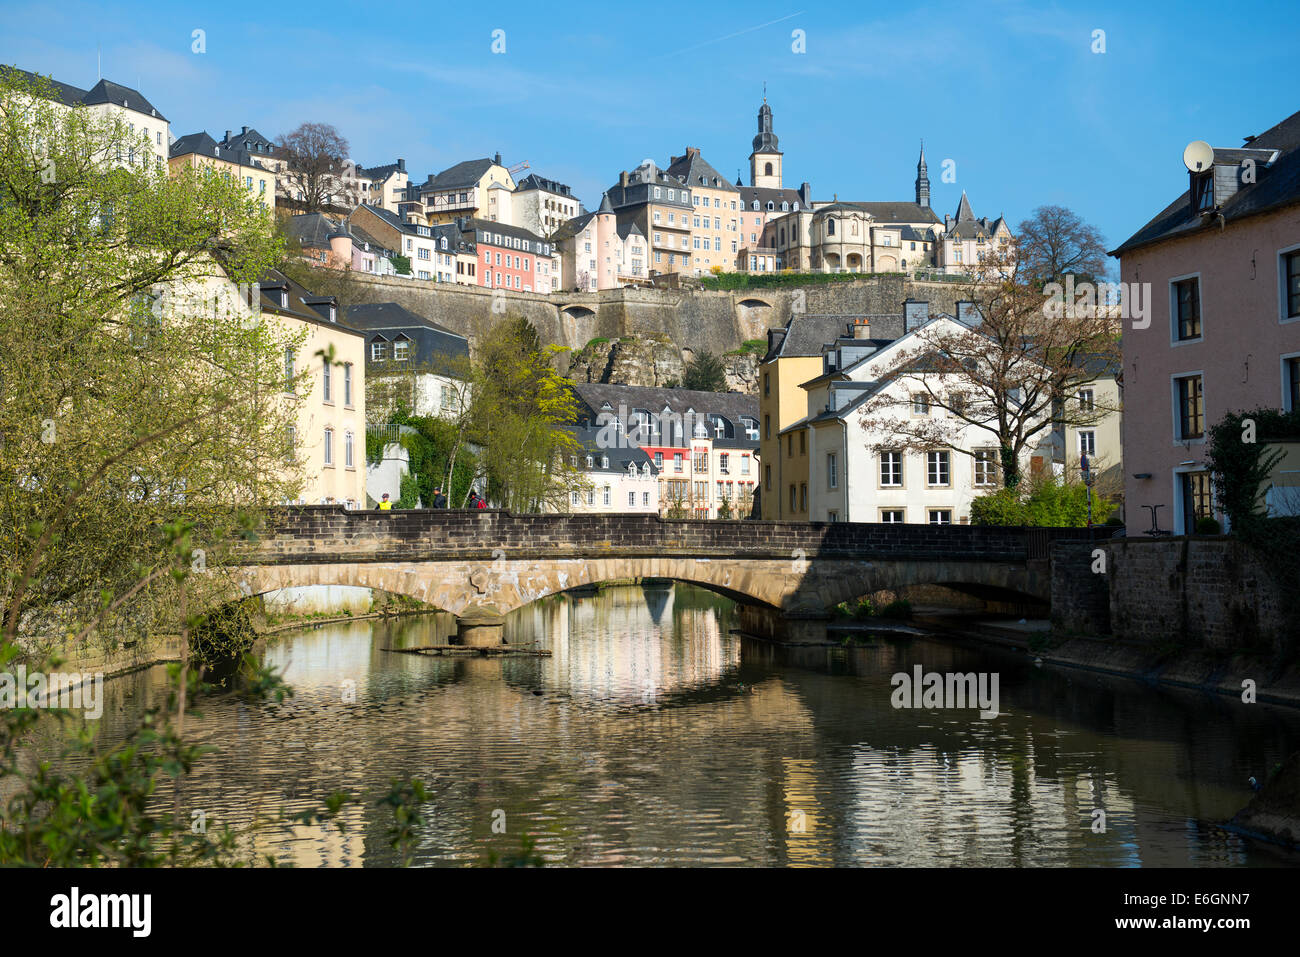 Downtown Grund of Luxembourg City, view with a bridge across the ...